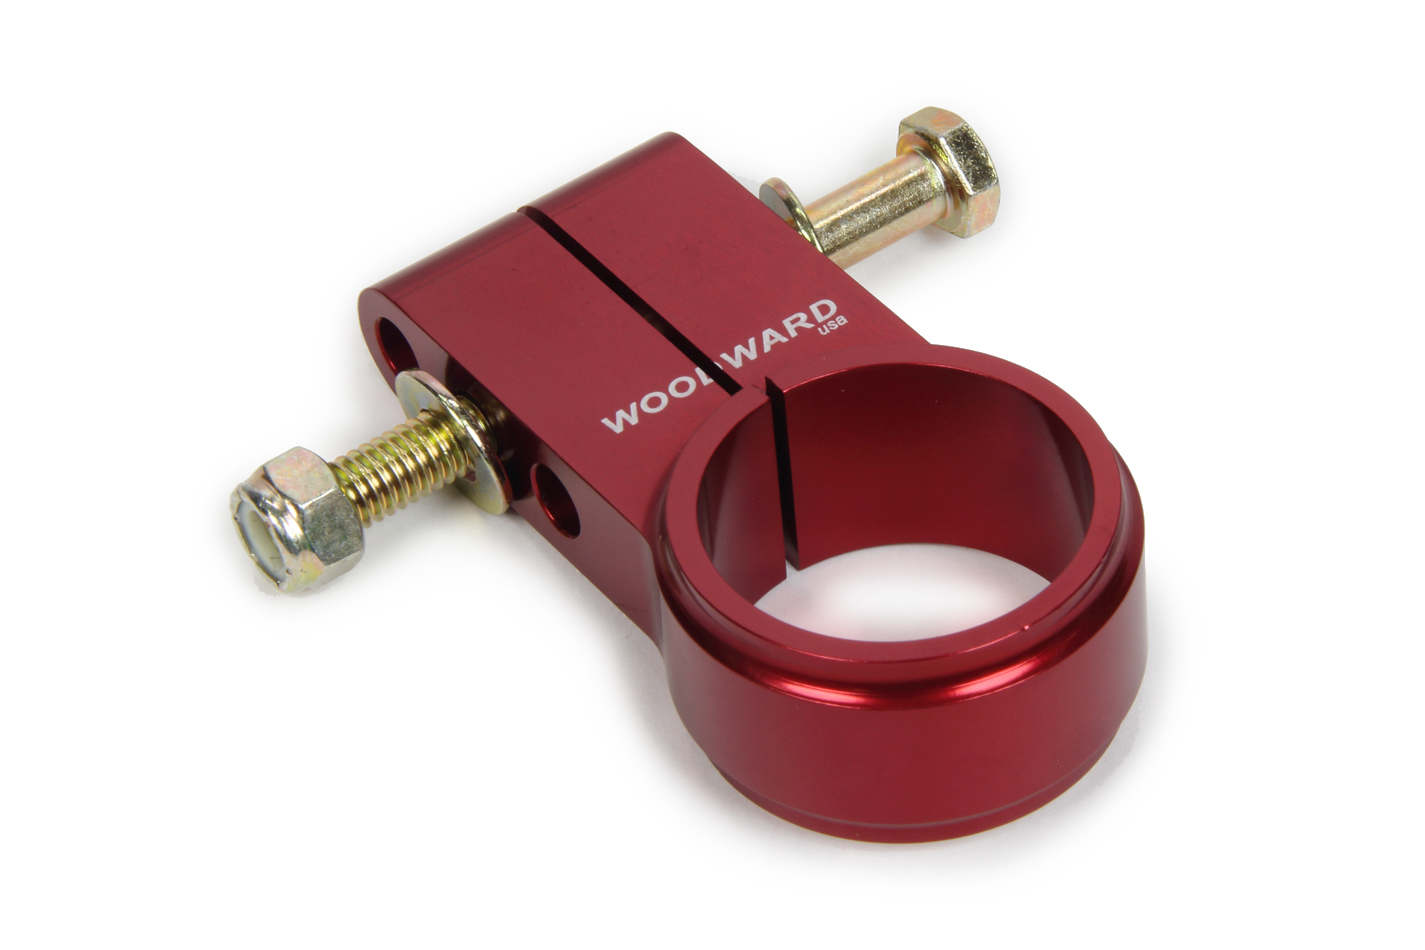 Woodward Machine SBC80-3 Steering Column Clamp, 40 mm ID, 3 Hole Adjustable, Billet Aluminum, Red Anodized, Woodward Safety Steering Column, Each